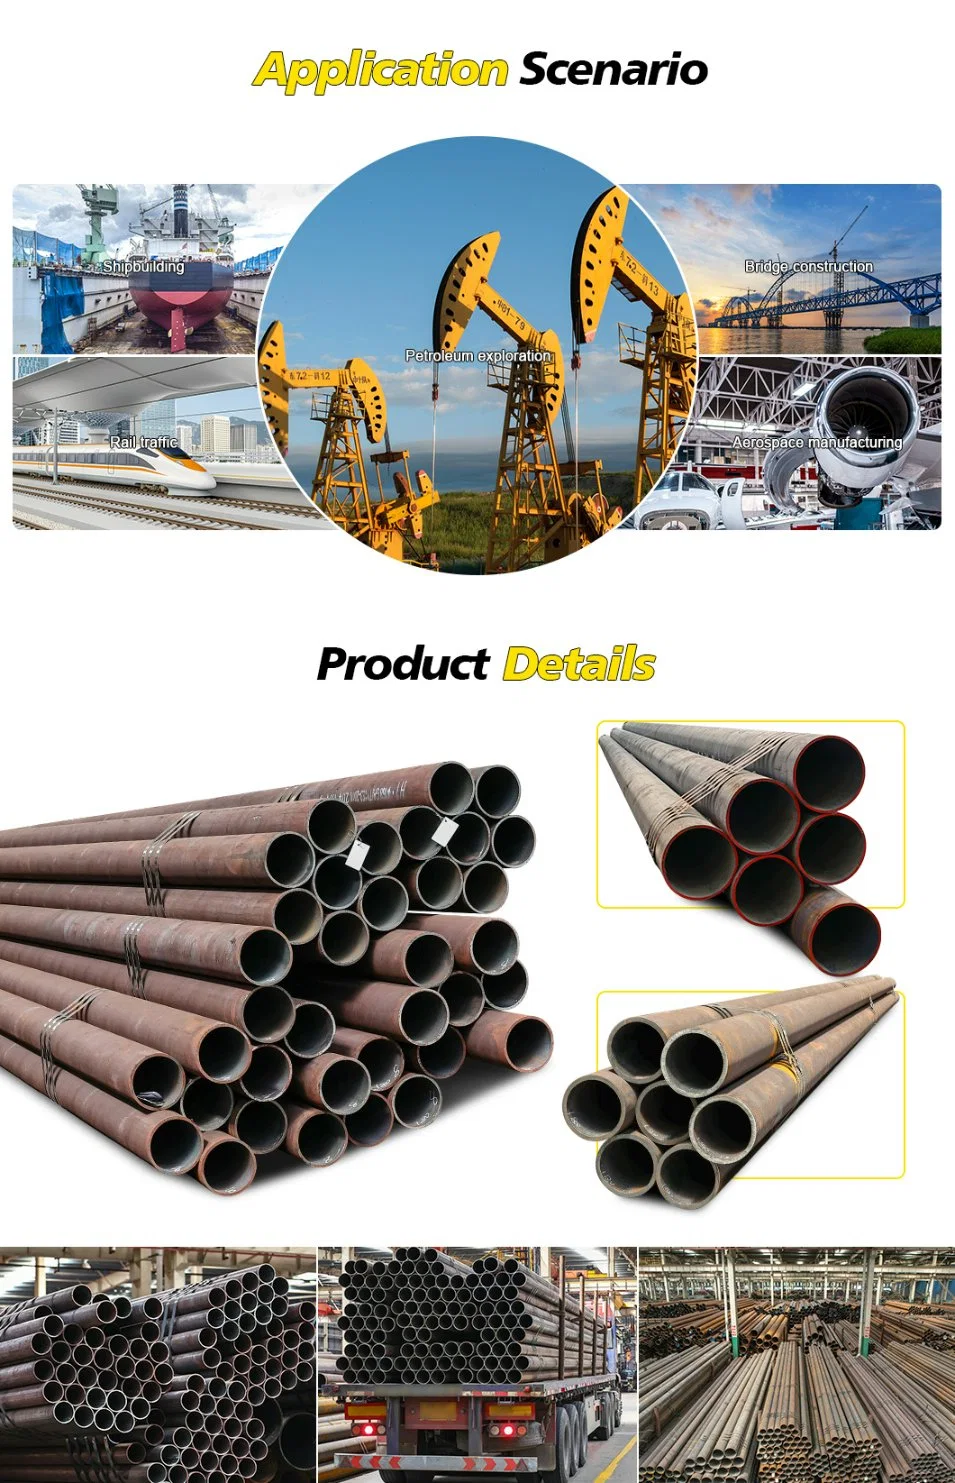 ASTM A36 A53 A192 Q235 Q235B 1045 4130 Sch40 Galvanized Black API 5L Gr. B Sch40s Grade B Welded Seamless Stainless Steel Coated Carbon Steel Steel Pipe Tubes